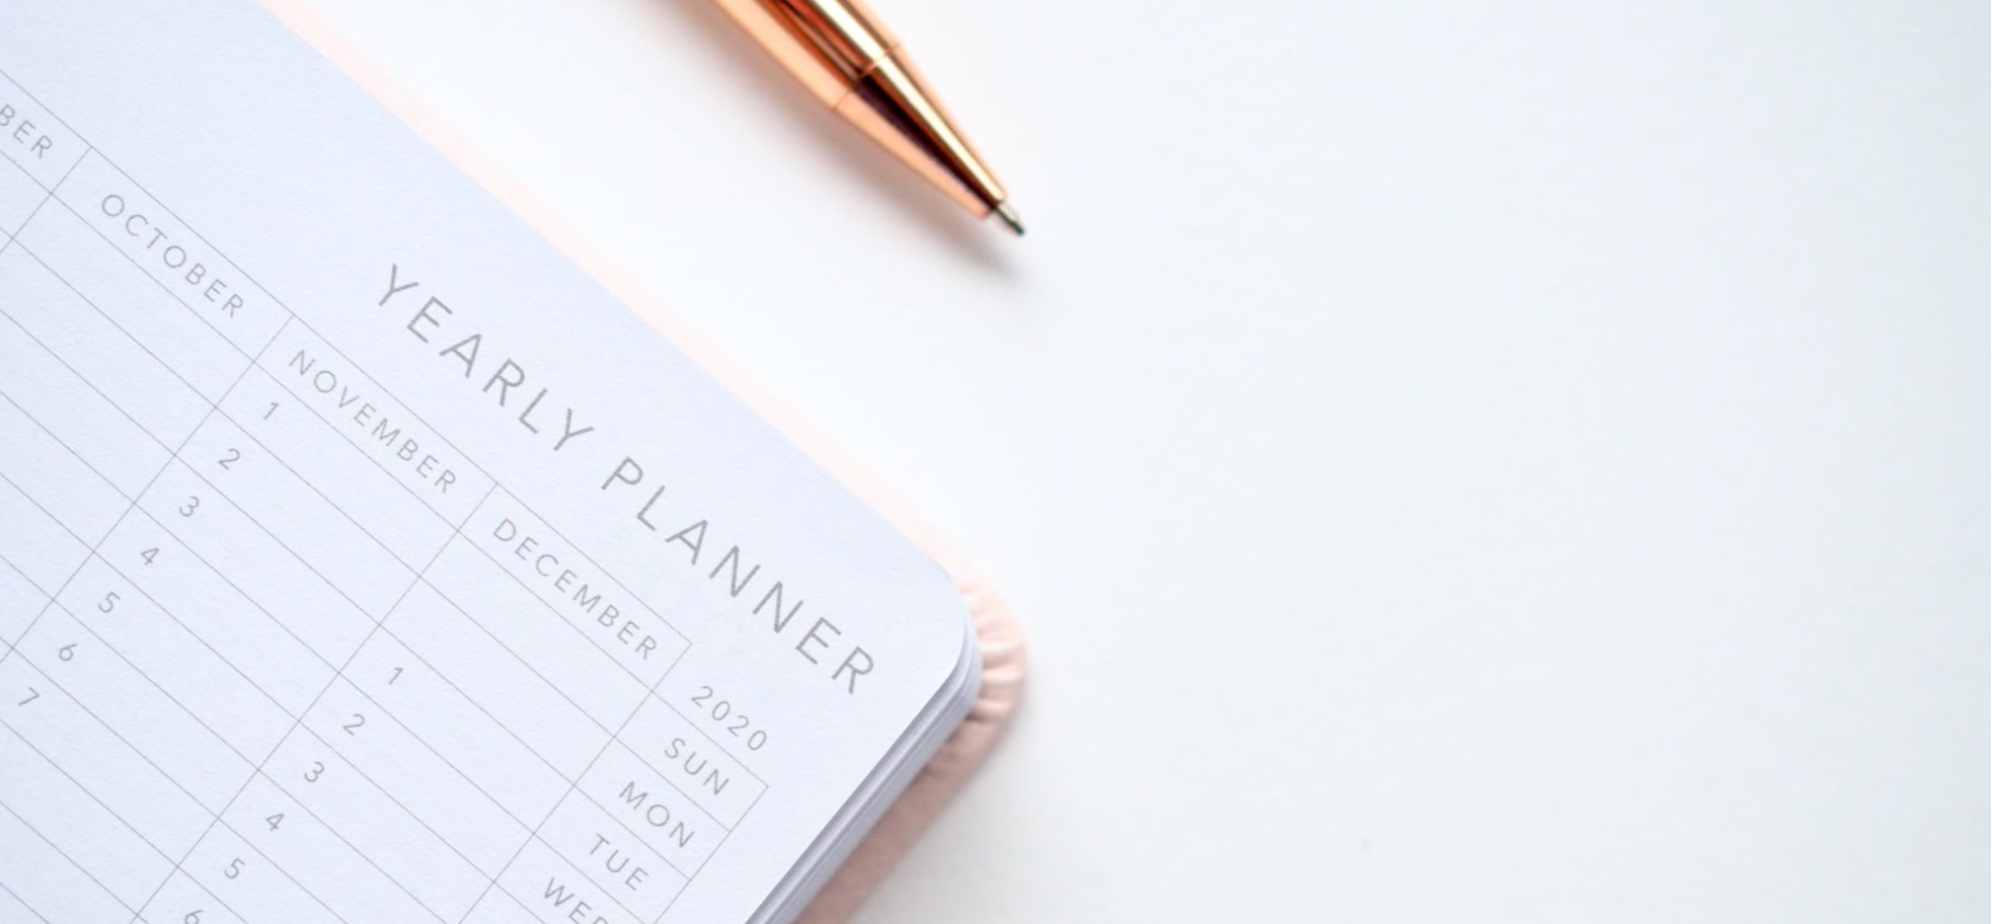 Yearly diary planner and pen